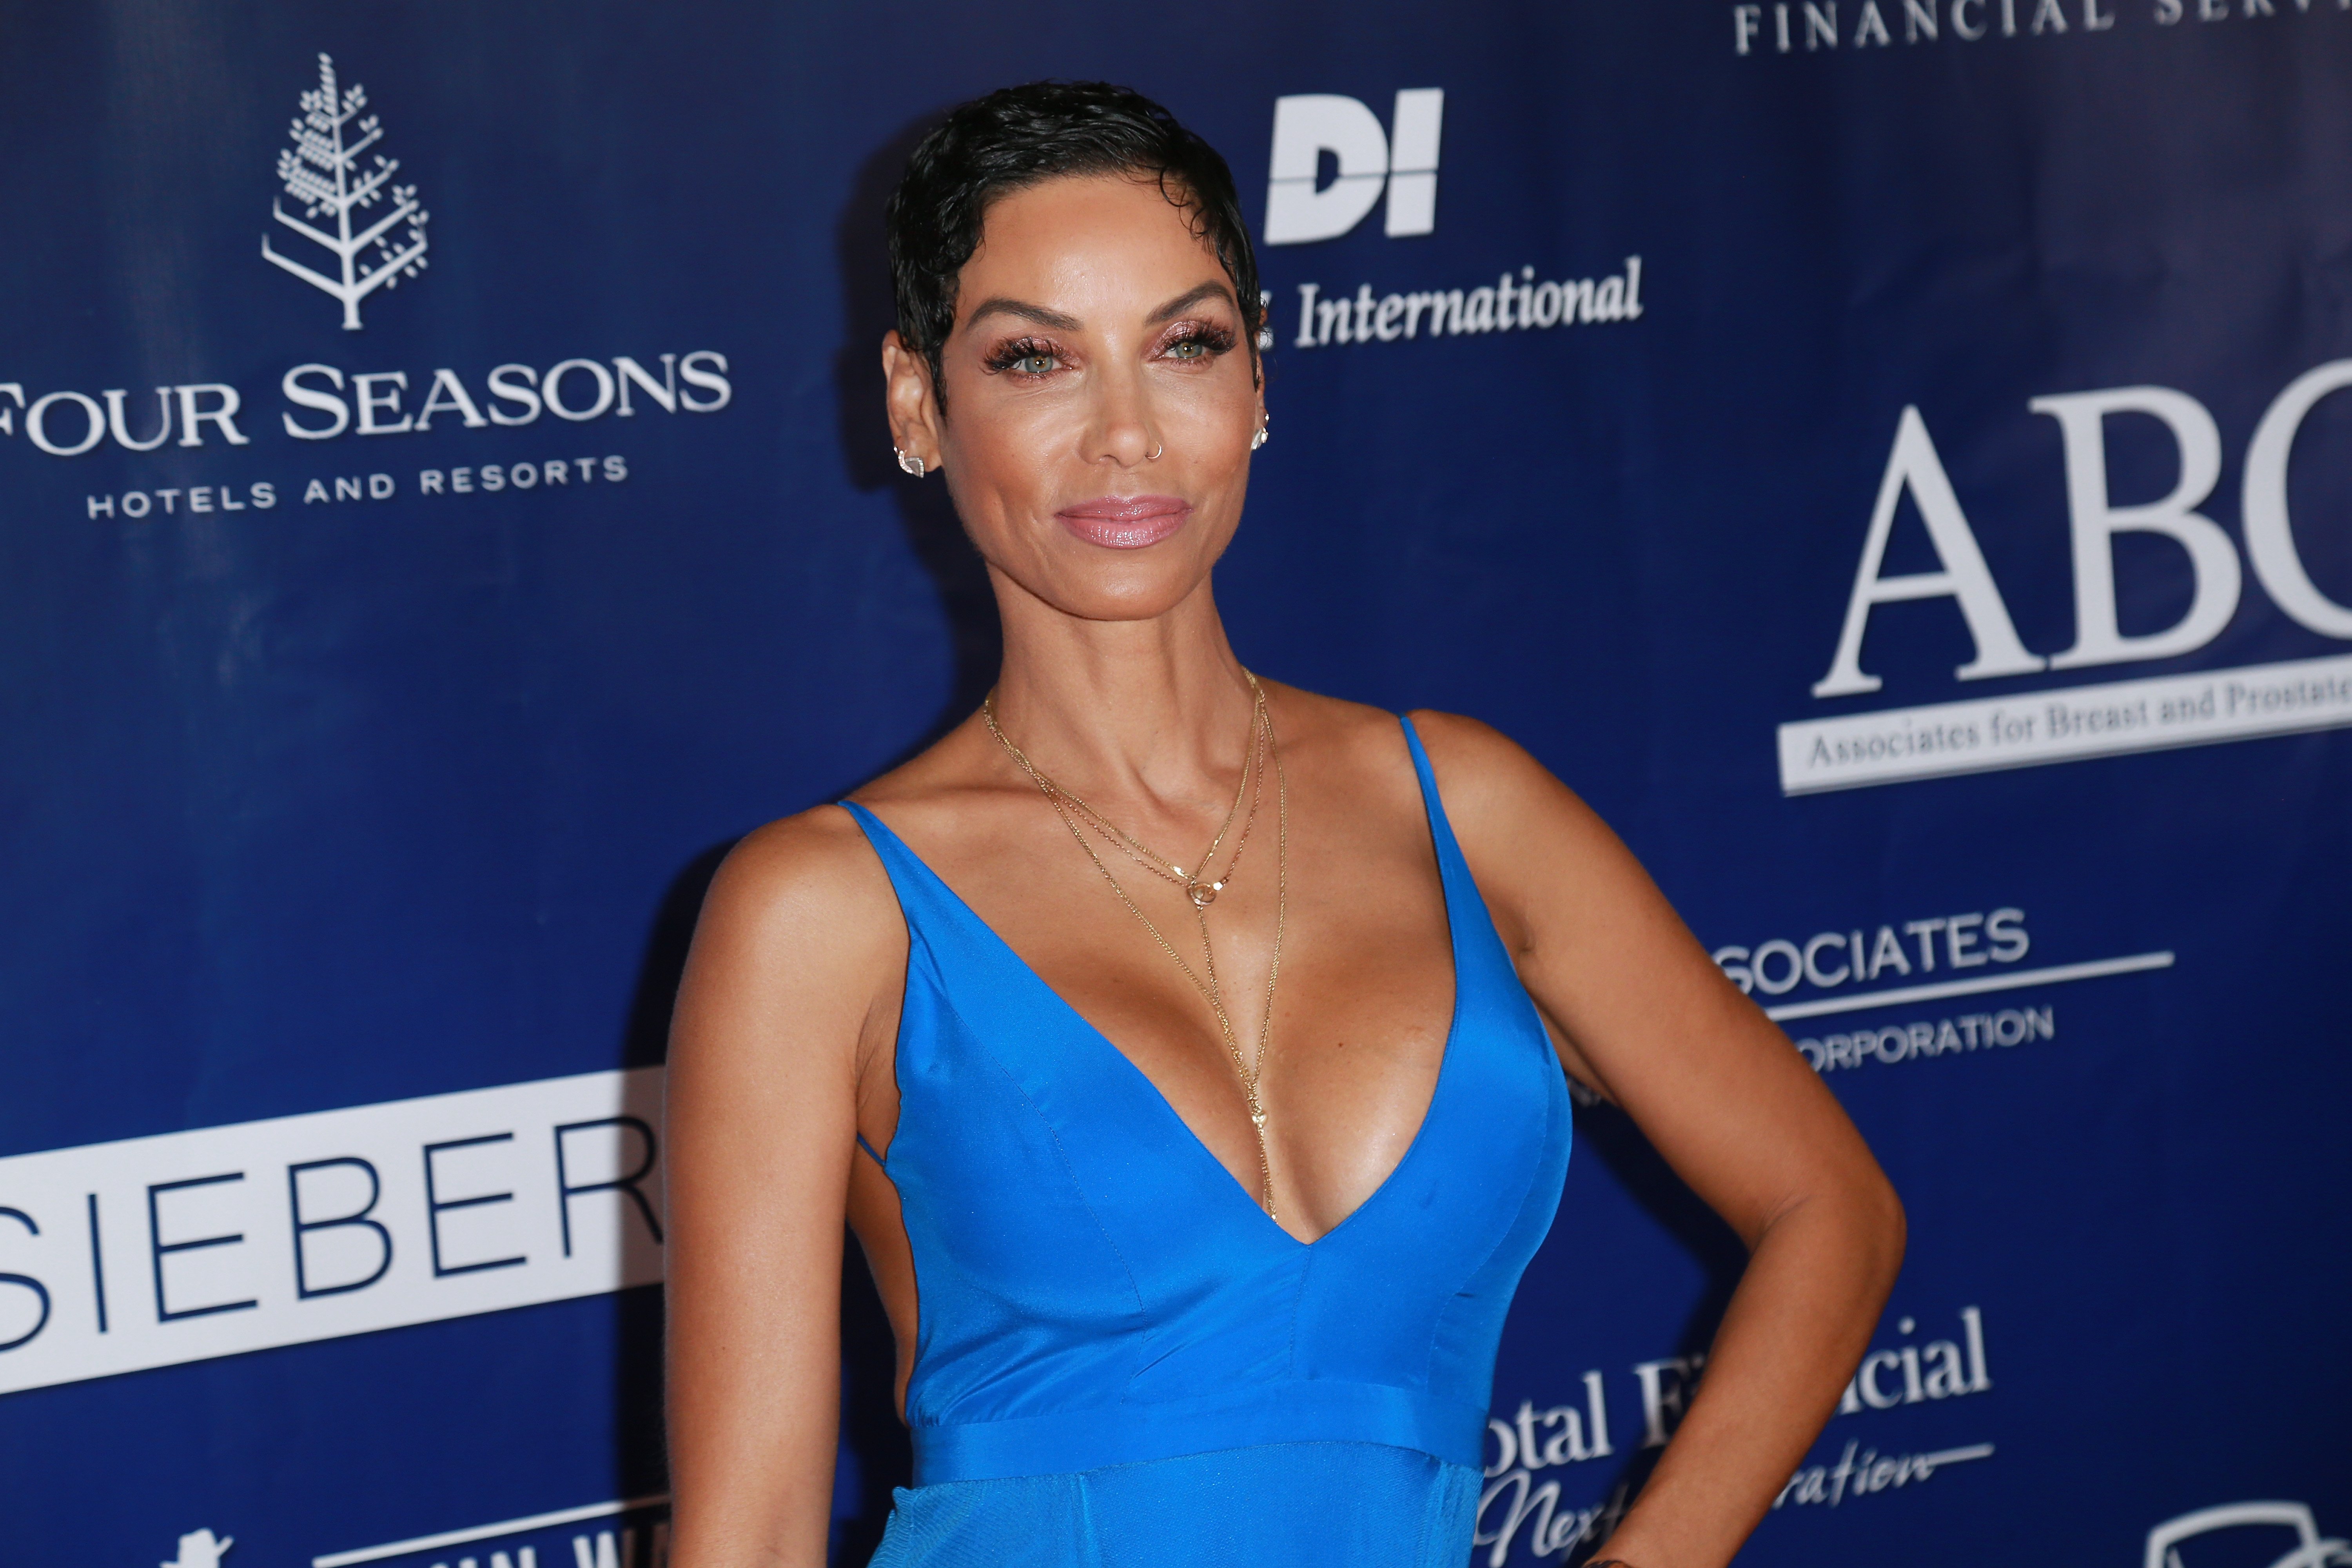 Nicole Mitchell Murphy attends the 28th Annual Talk of the Town Gala on November 18, 2017. | Source: Getty Images